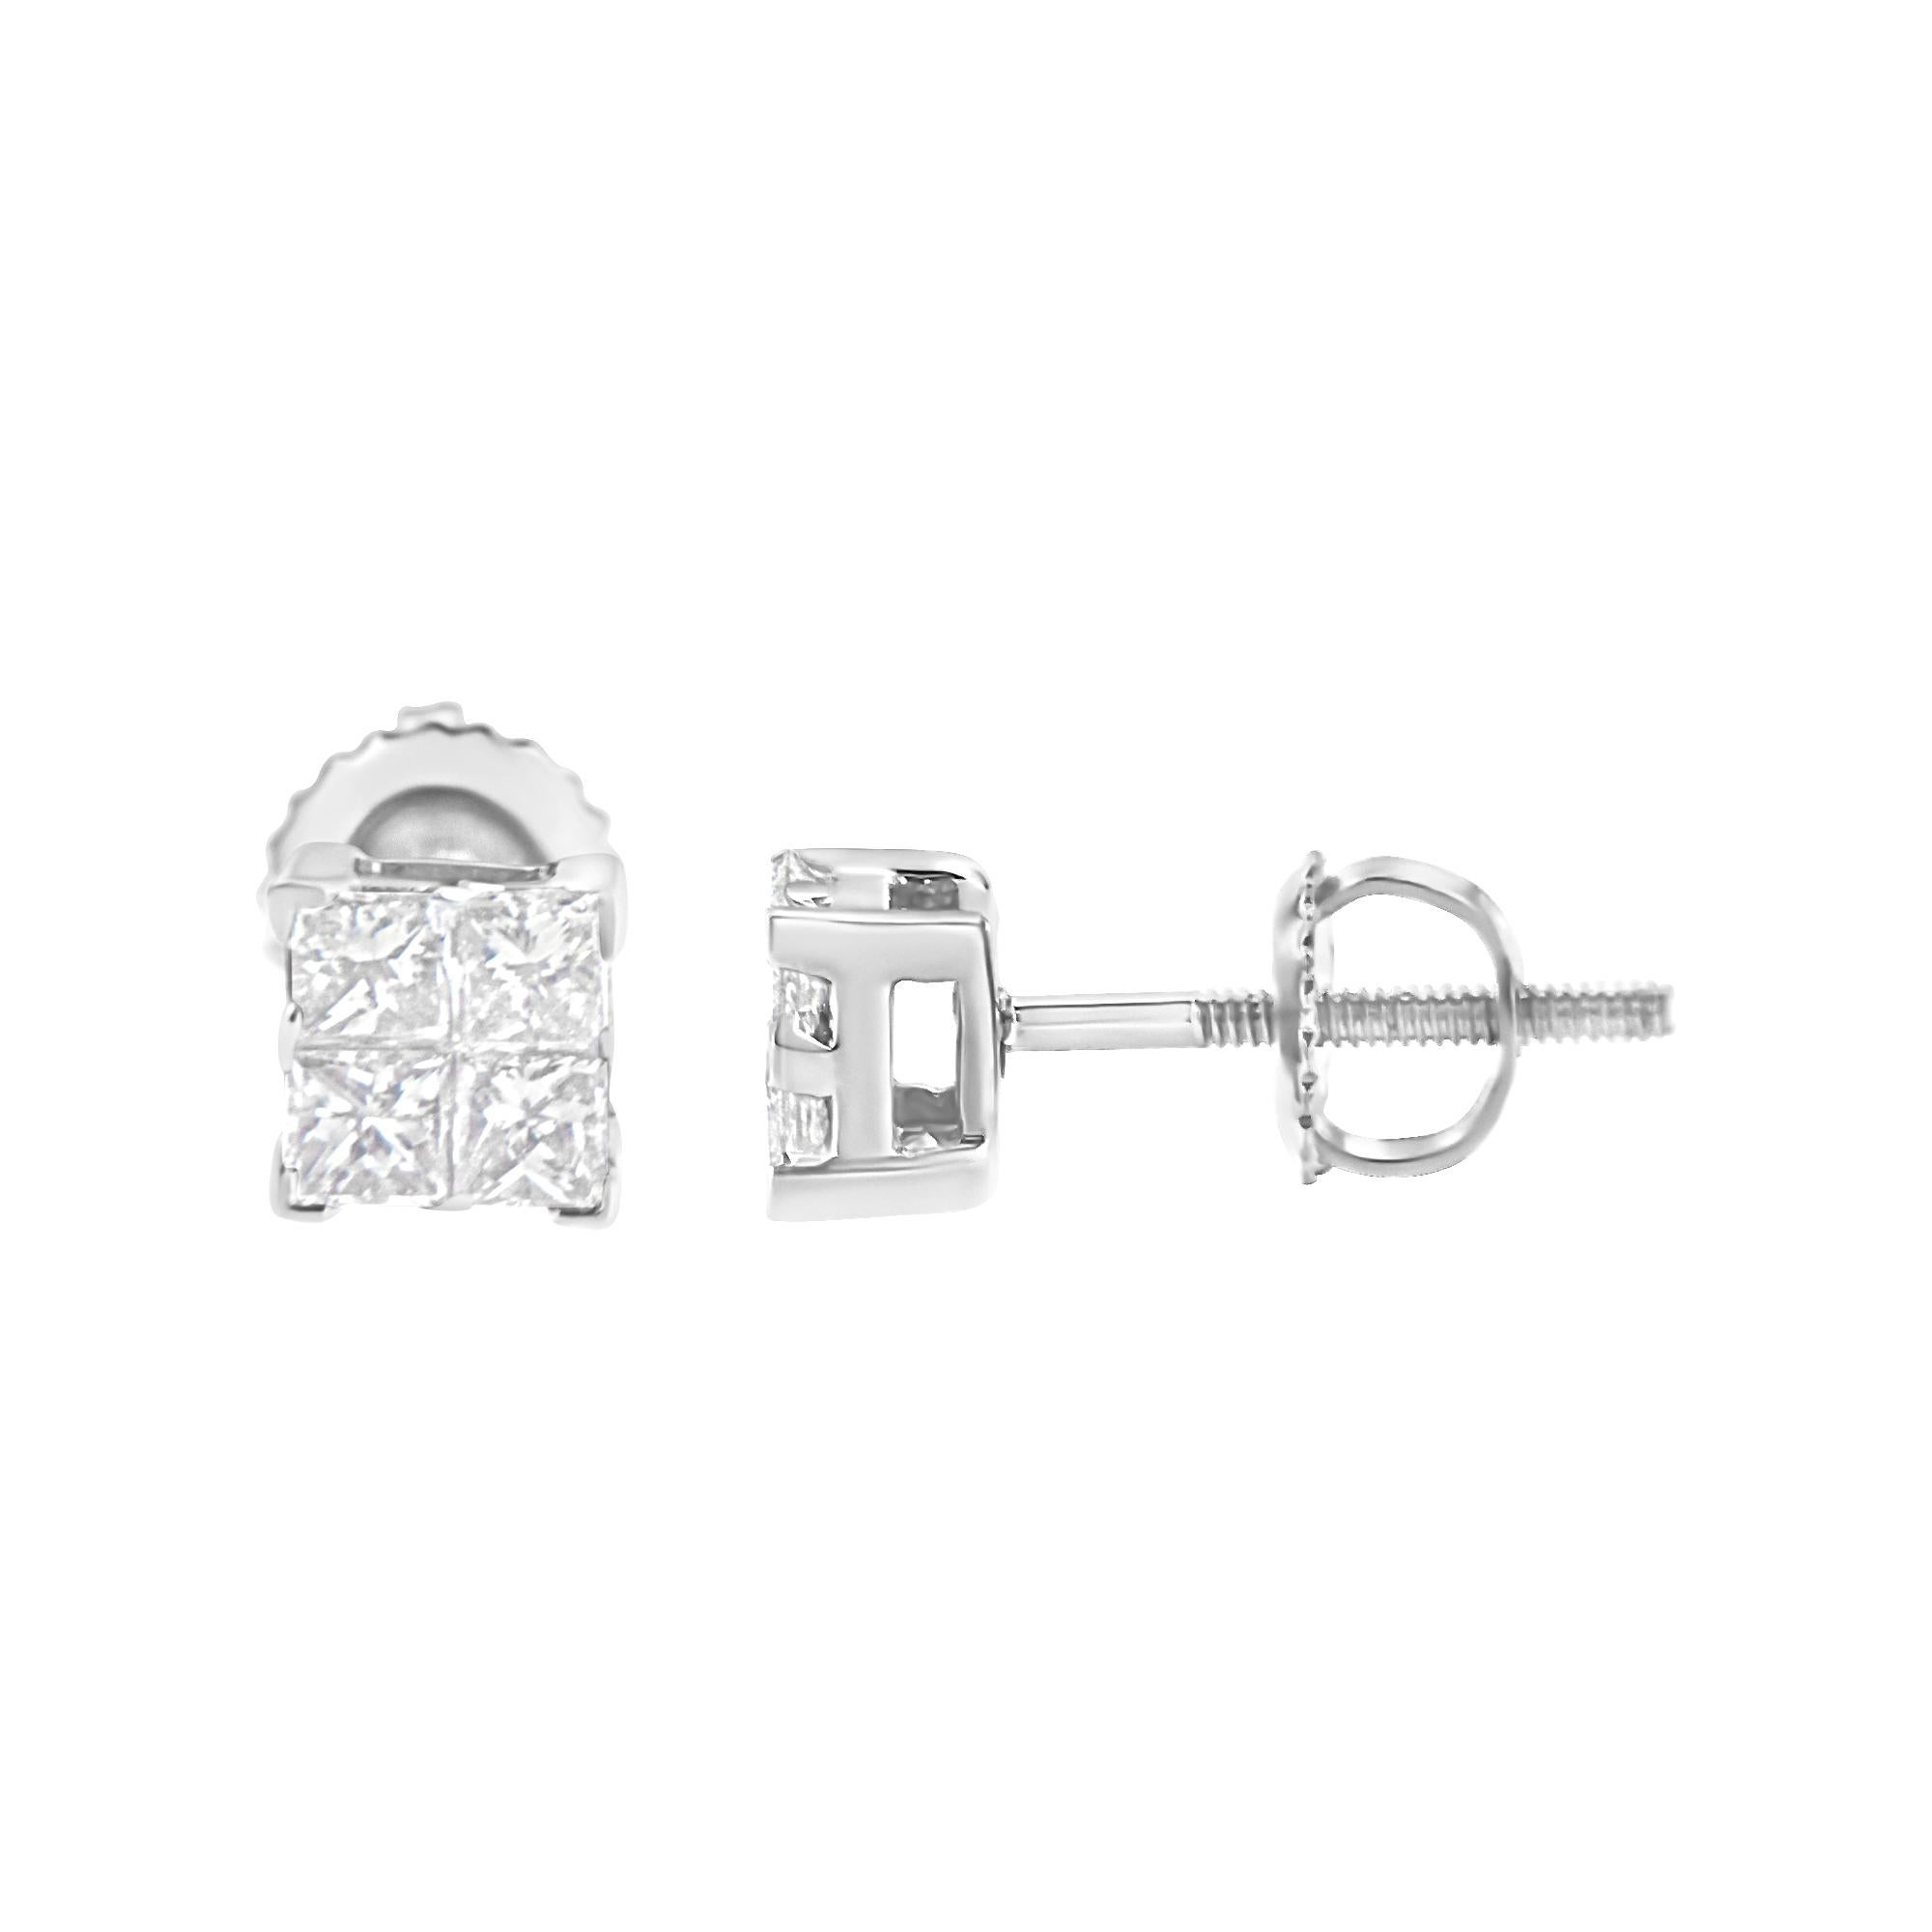 A pair of composite designed quad stud earrings with a cluster of four princess cut diamonds on each stud. These diamonds are invisibly set, creating a larger diamond look. Crafted in 10 karat white gold, they have a total diamond weight of 1/2